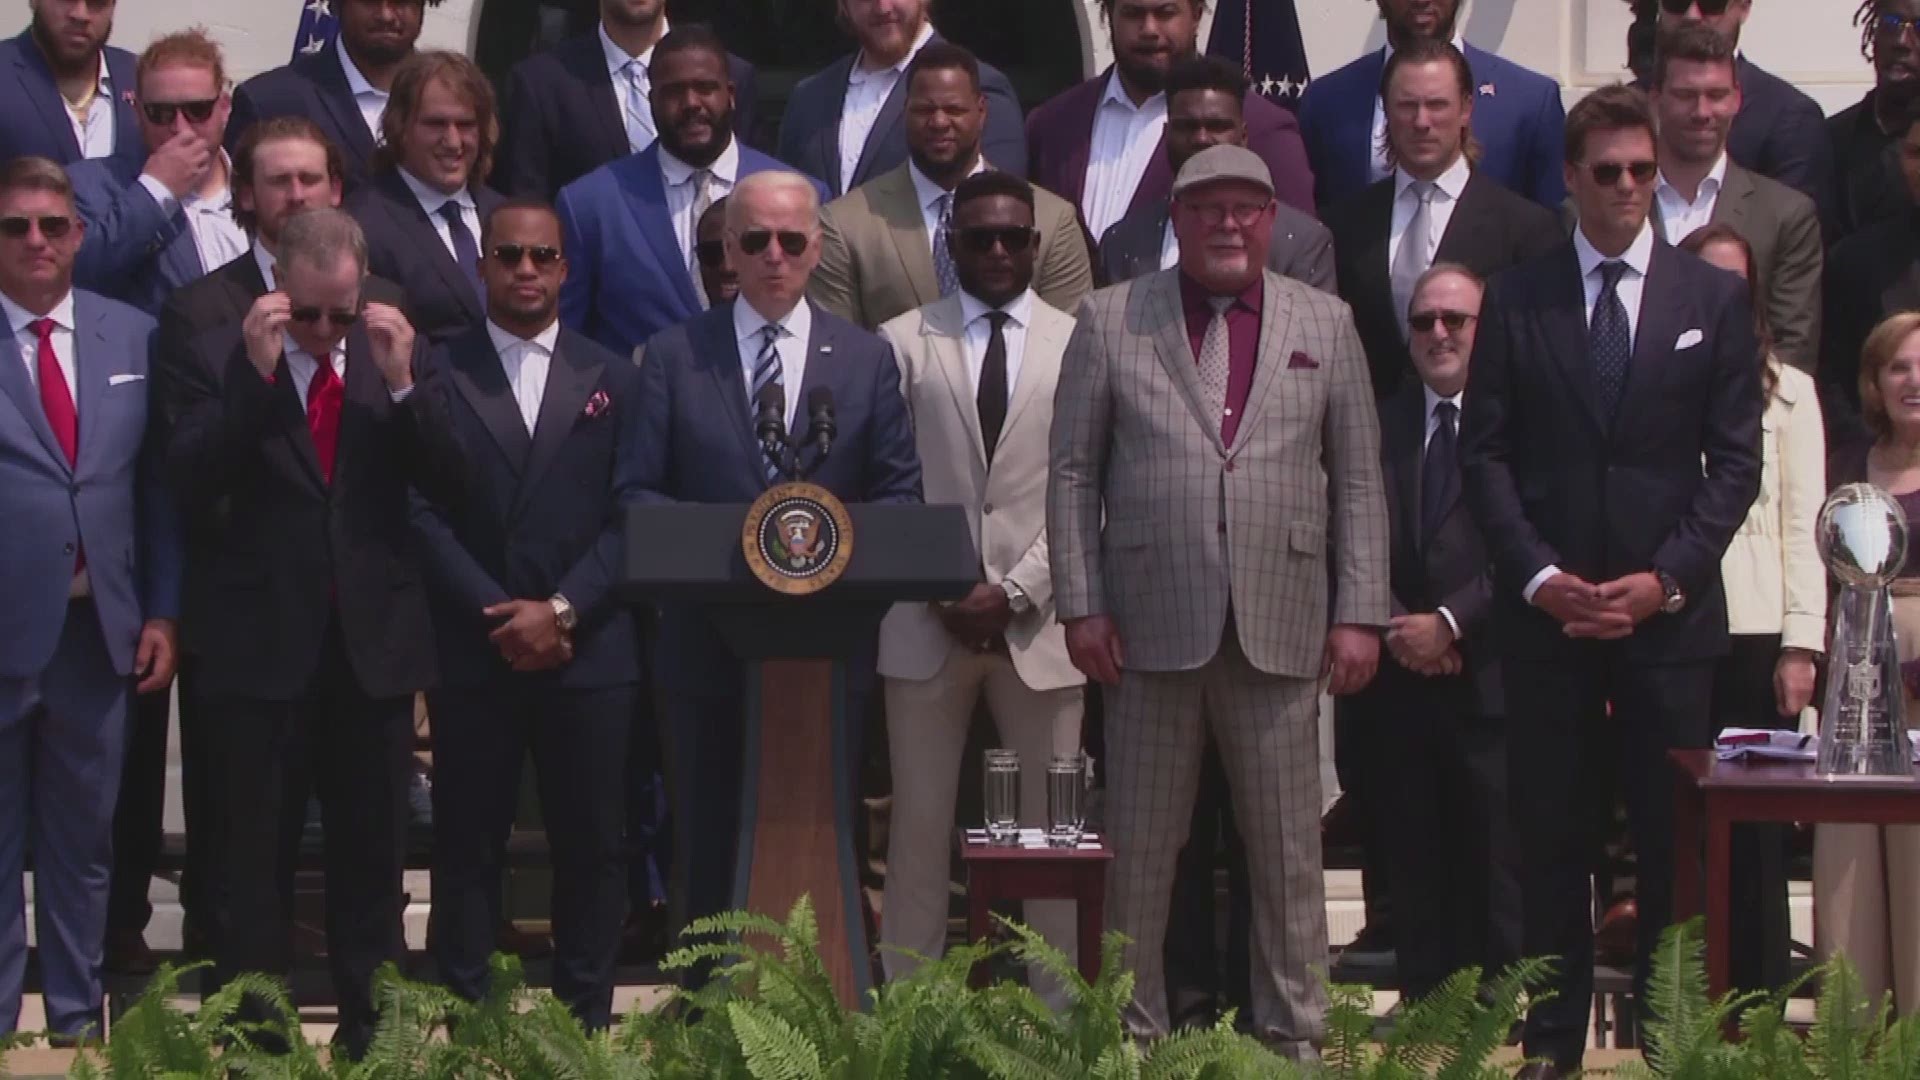 President Biden not only acknowledged Tampa Bay's Super Bowl win during the Buccaneers' visit to the White House, but also the Lightning's Stanley Cup victory.